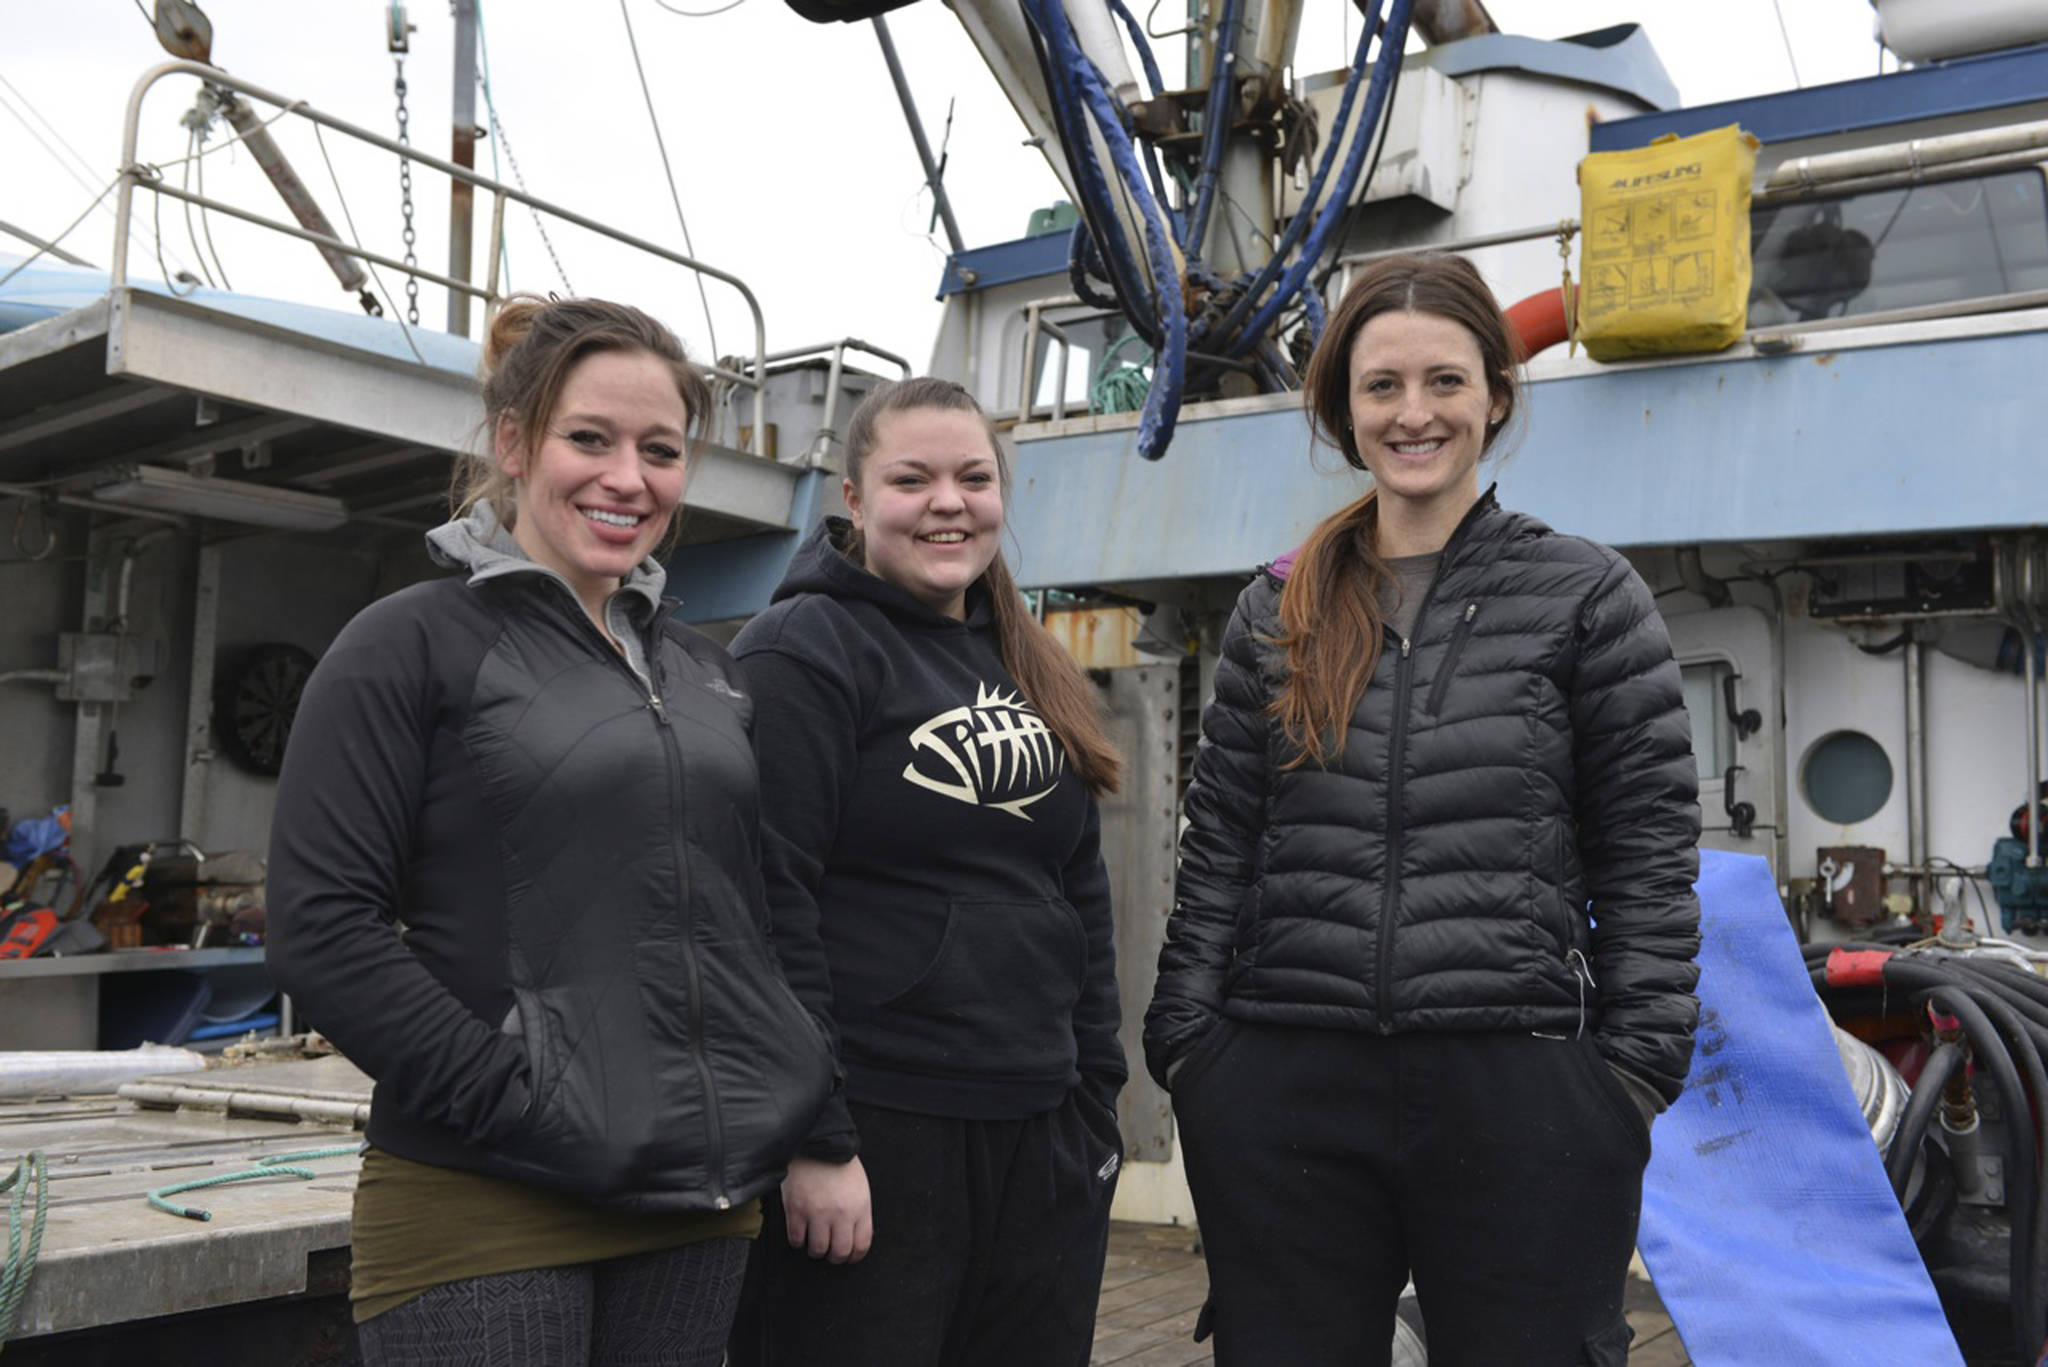 In this March 17, 2017 photo, Brannon Finney, from left, Kelsey Kubik and Bettina Nichols stand on the deck of the fishing tender Kamilar in the morning at Eliason Harbor in Sitka, Alaska. On a door of the F/V Kamilar is a sticker with pink script: Girls fish too. Vessel owner Finney is captaining the tender for the Sitka sac roe herring fishery with her all-female crew, something that&